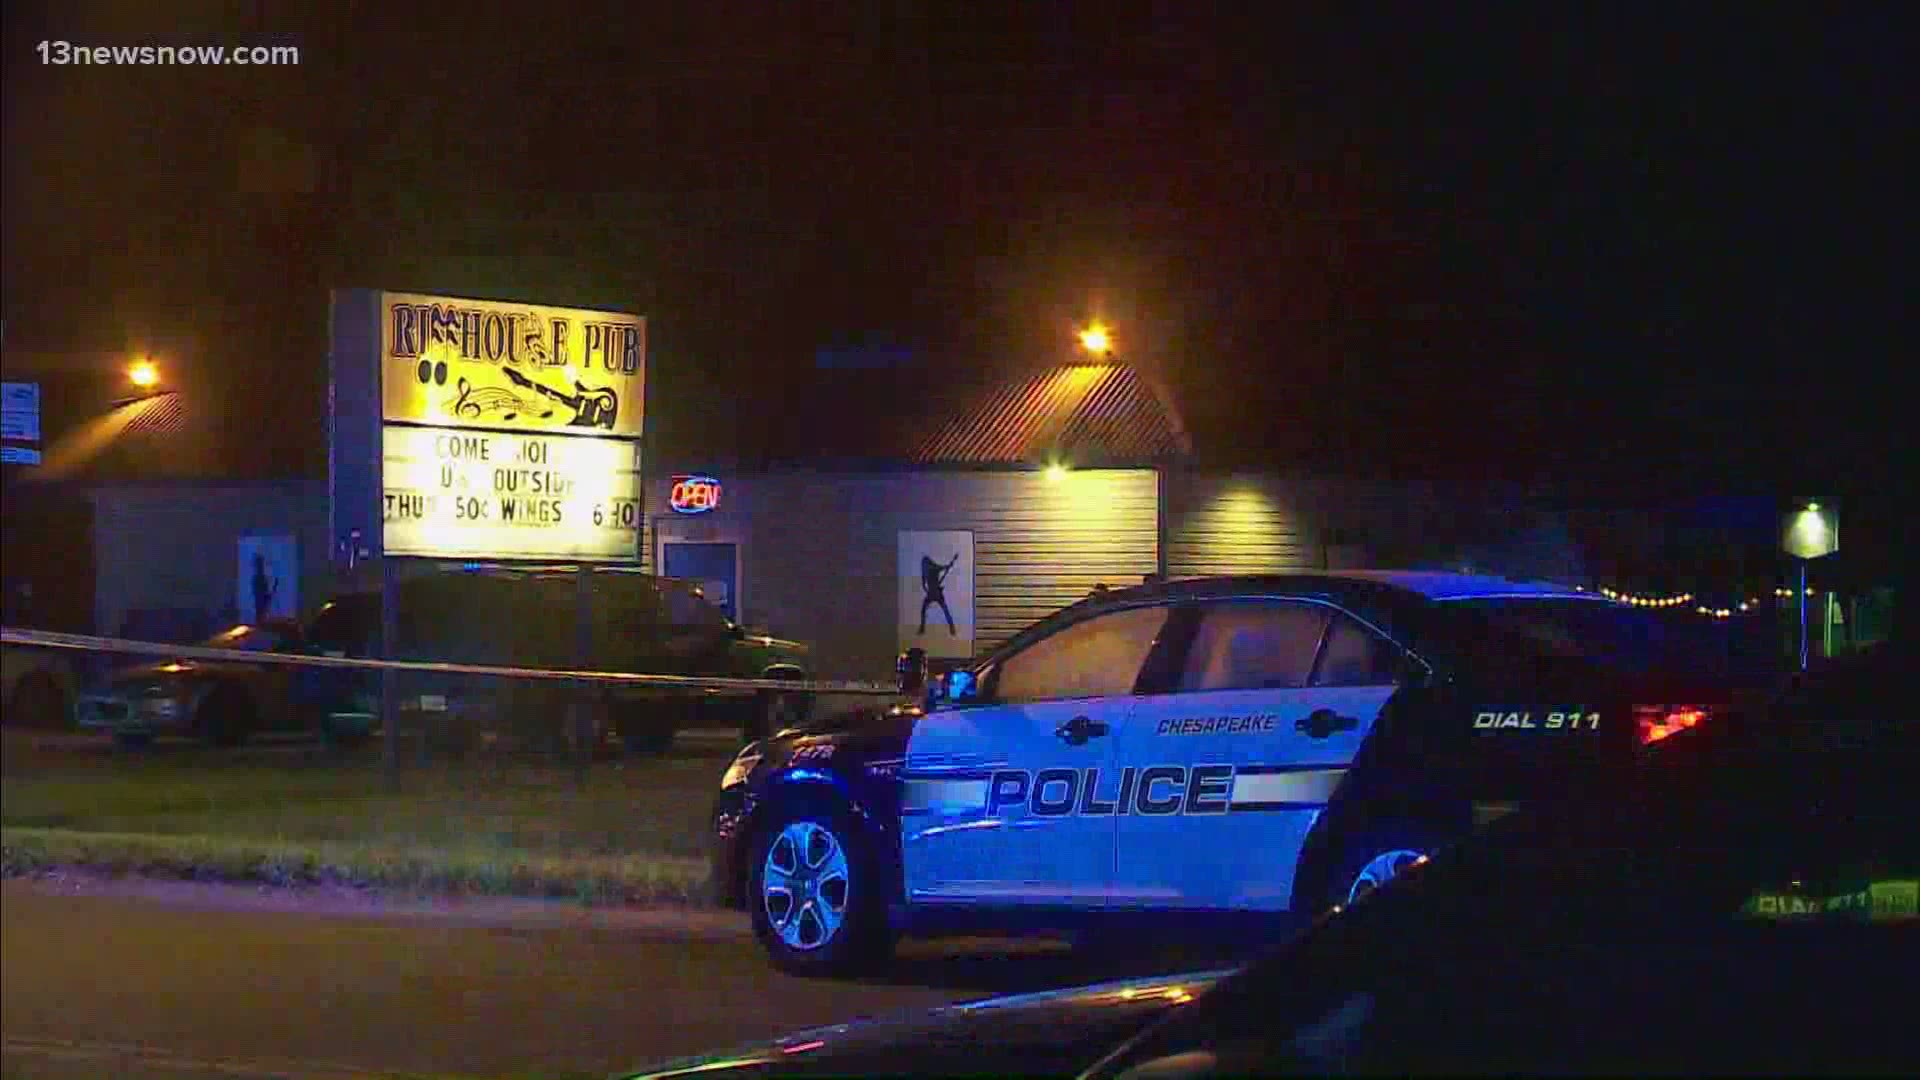 Police say the three people shot were taken to the hospital with life-threatening injuries.